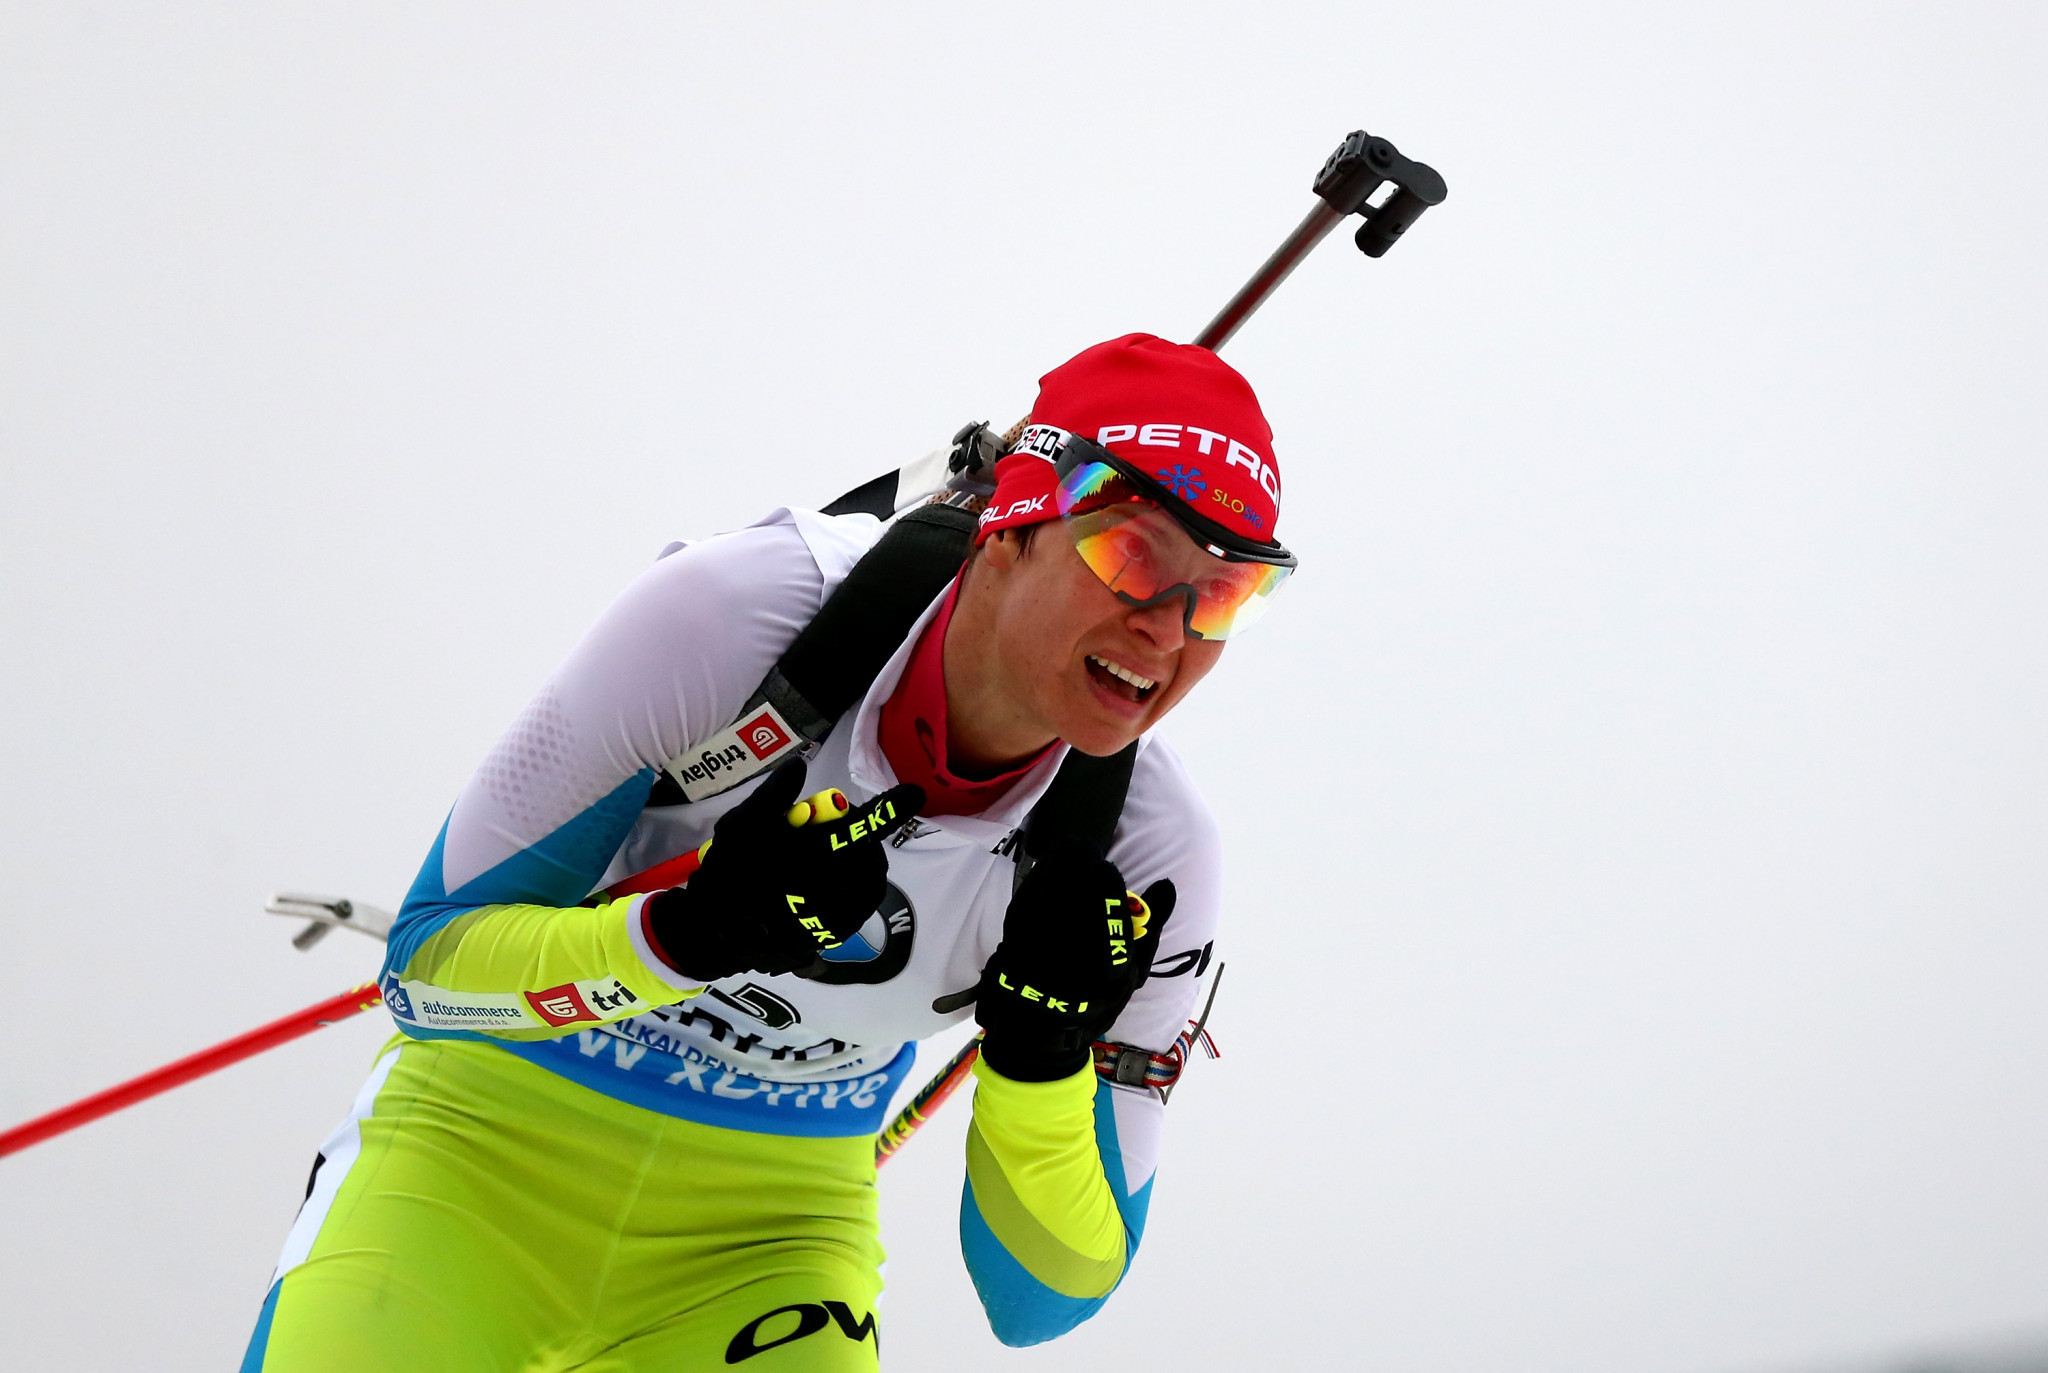 Slovenian biathlete Teja Gregorin has been named as the sole athlete caught in International Olympic Committee retests of doping samples from the Vancouver 2010 Winter Olympic Games ©Getty Images